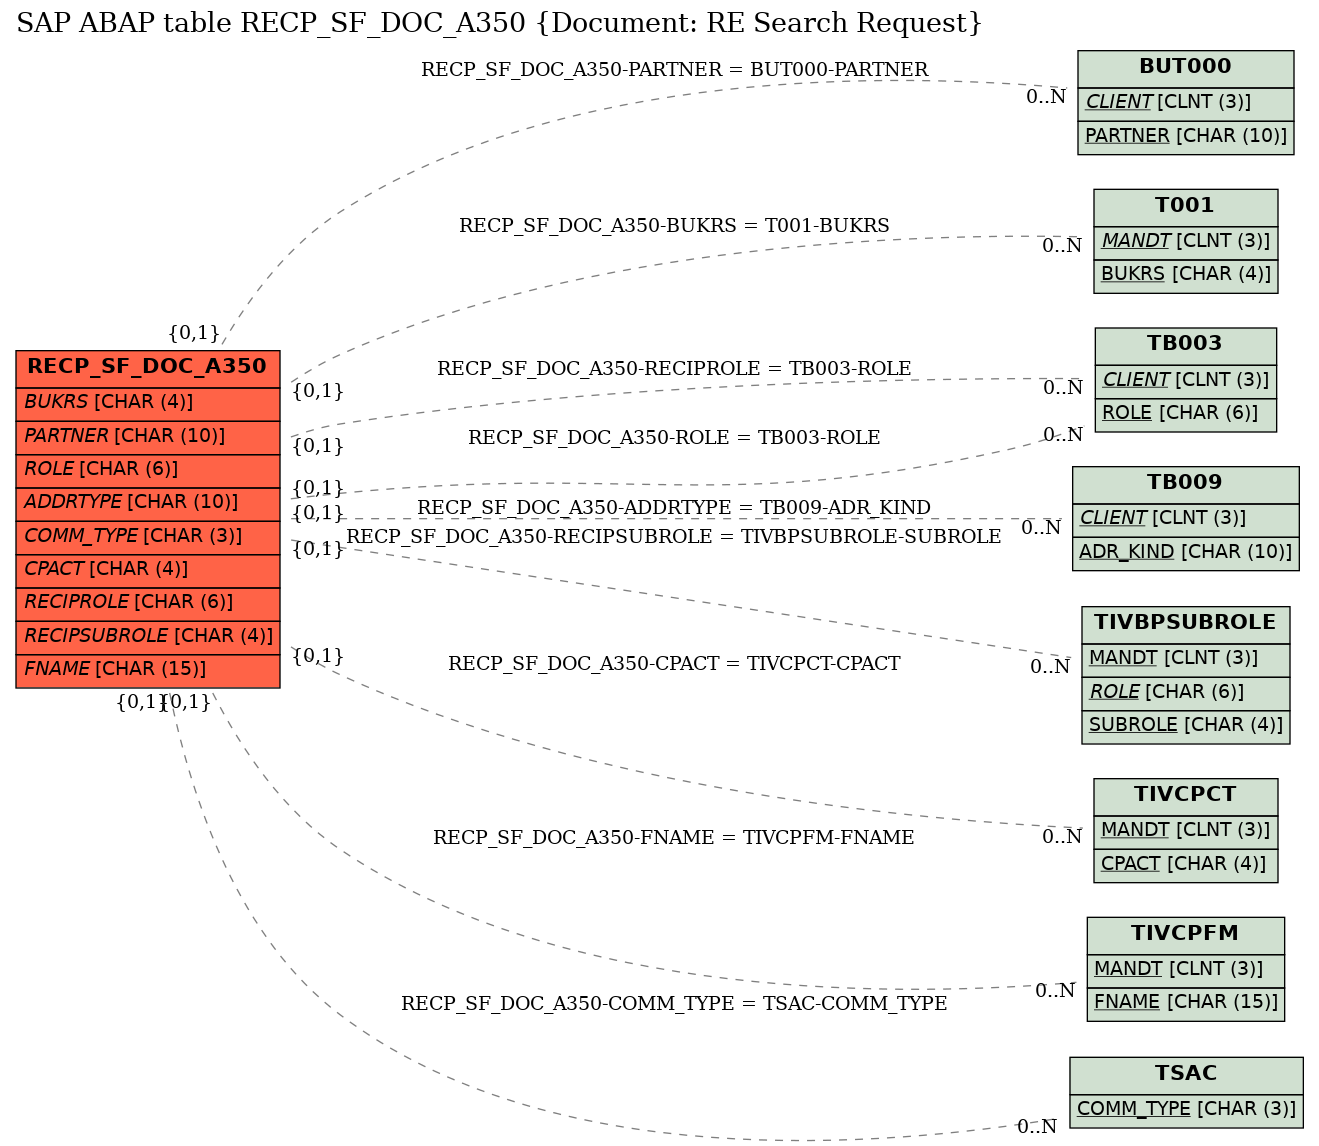 E-R Diagram for table RECP_SF_DOC_A350 (Document: RE Search Request)